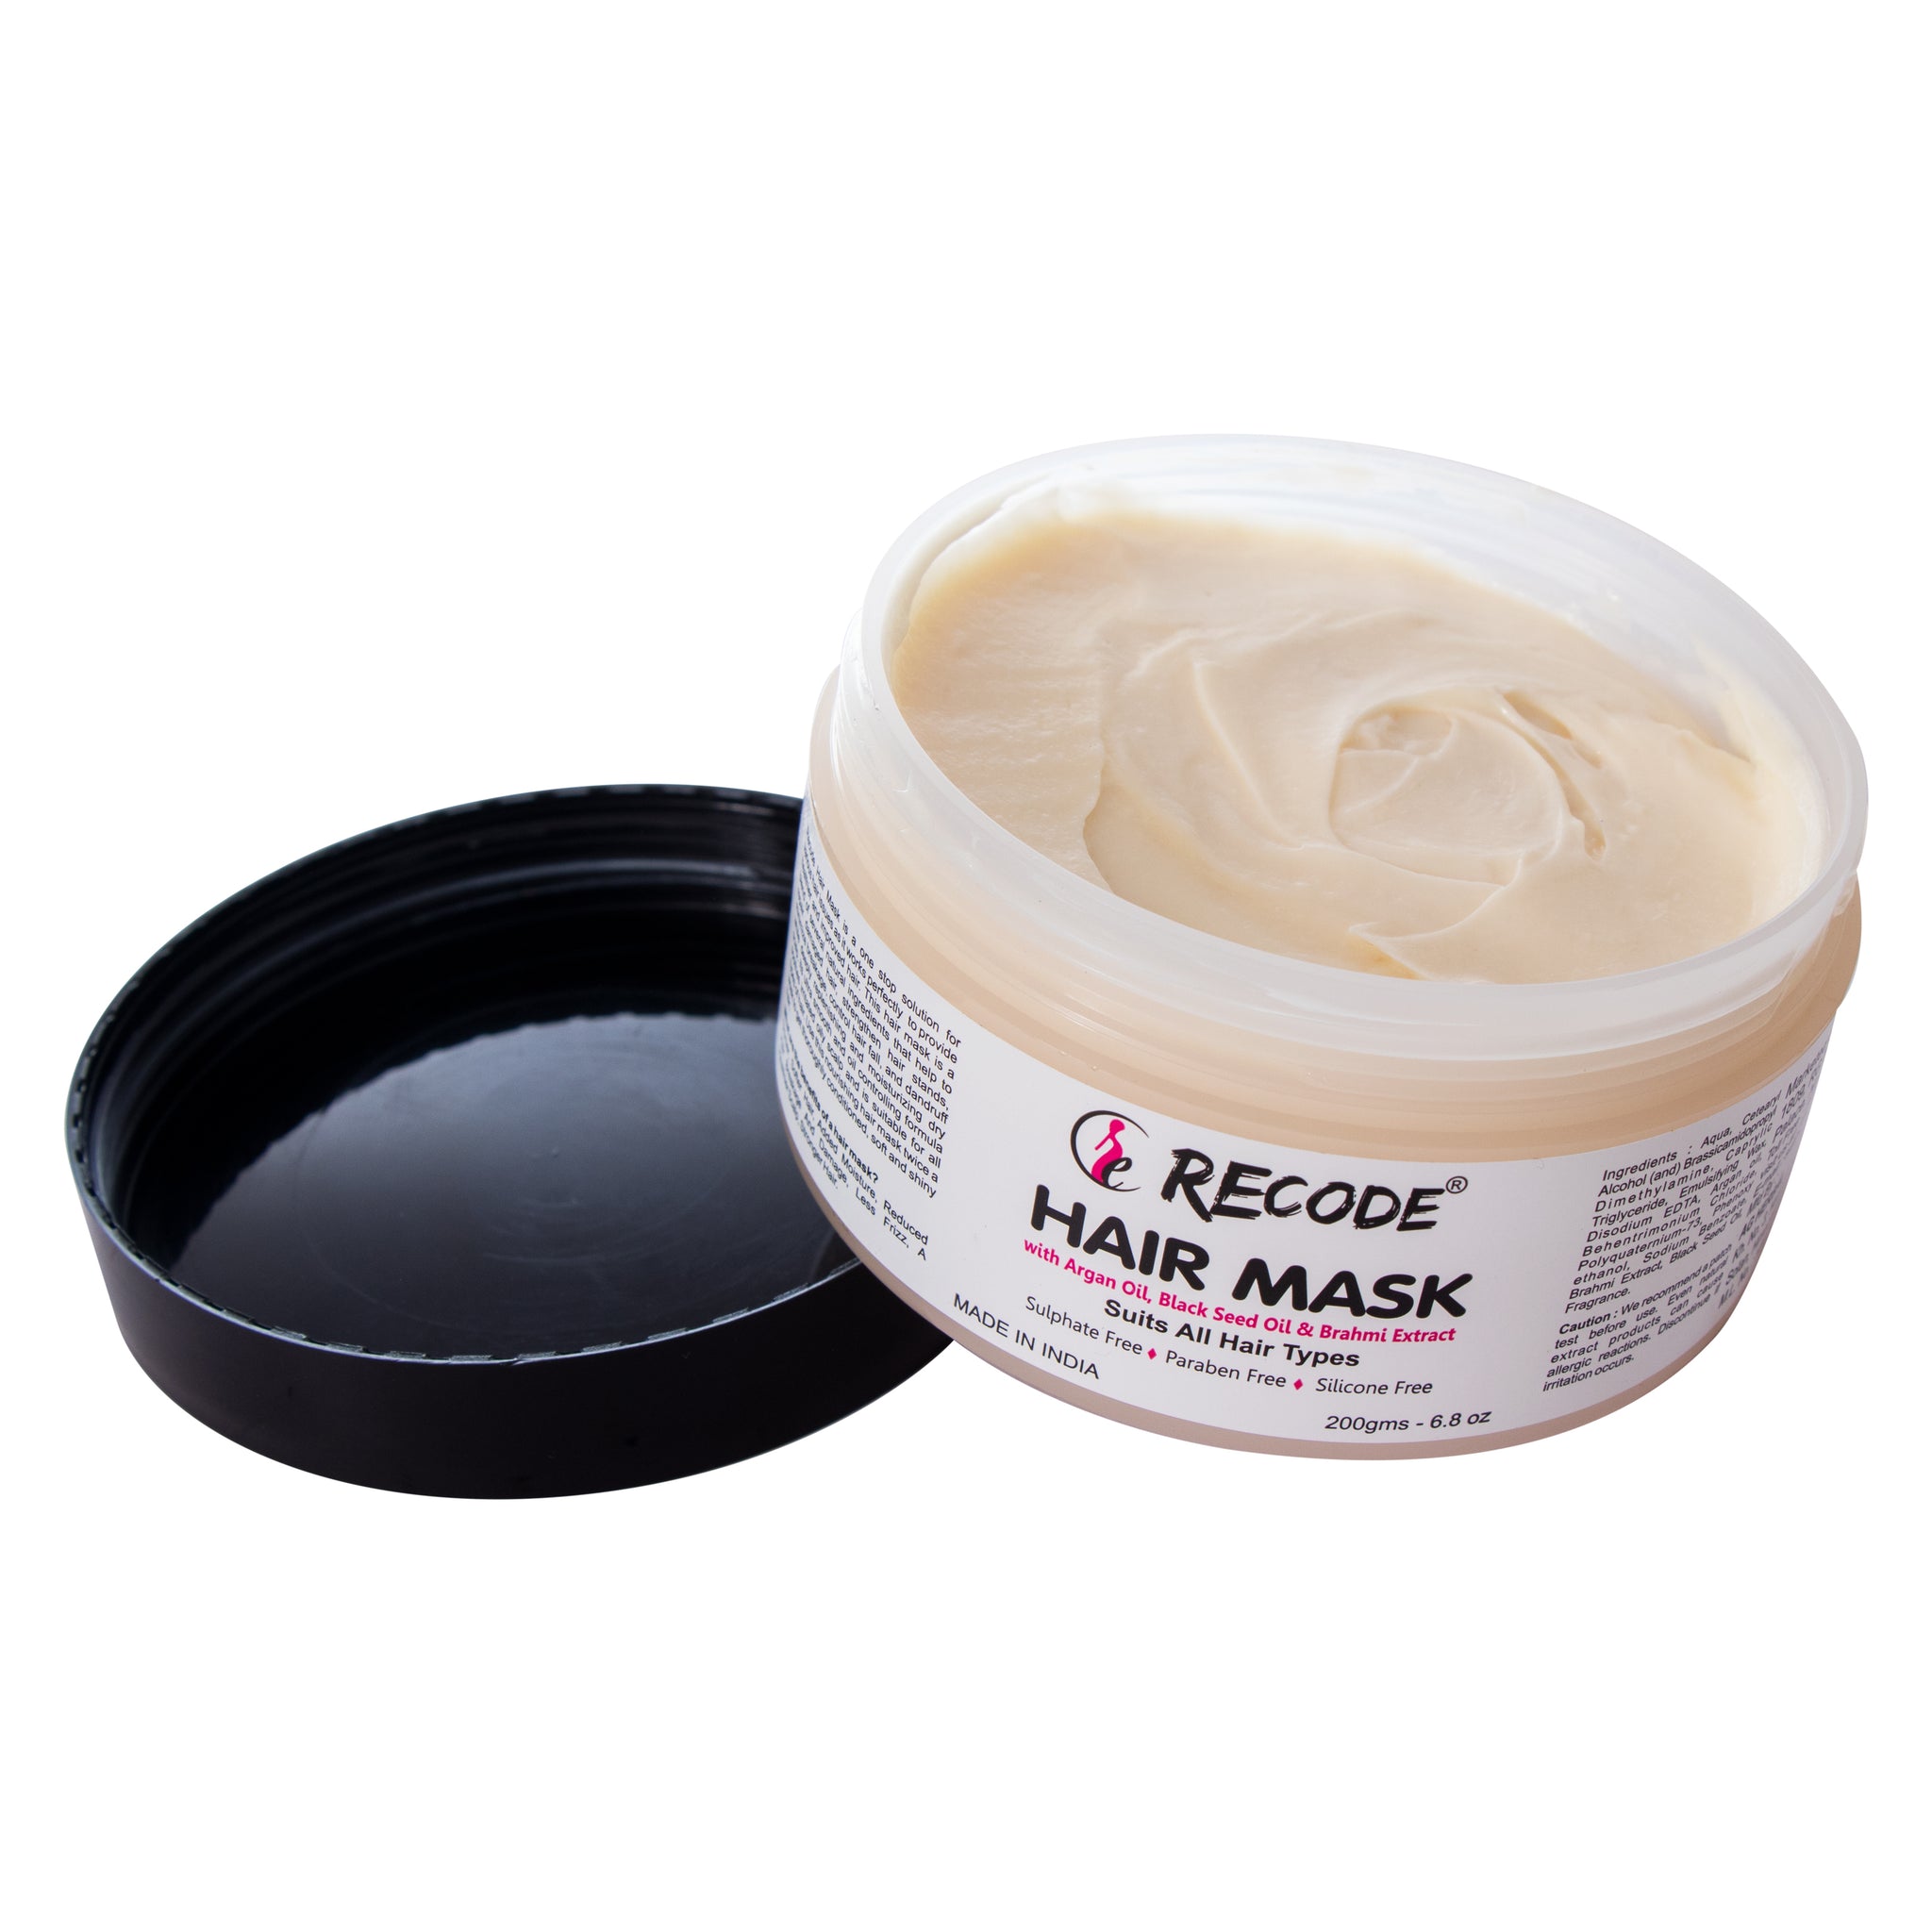 Recode Sulphate Free Hair Mask for All Hair Types - 200 gms